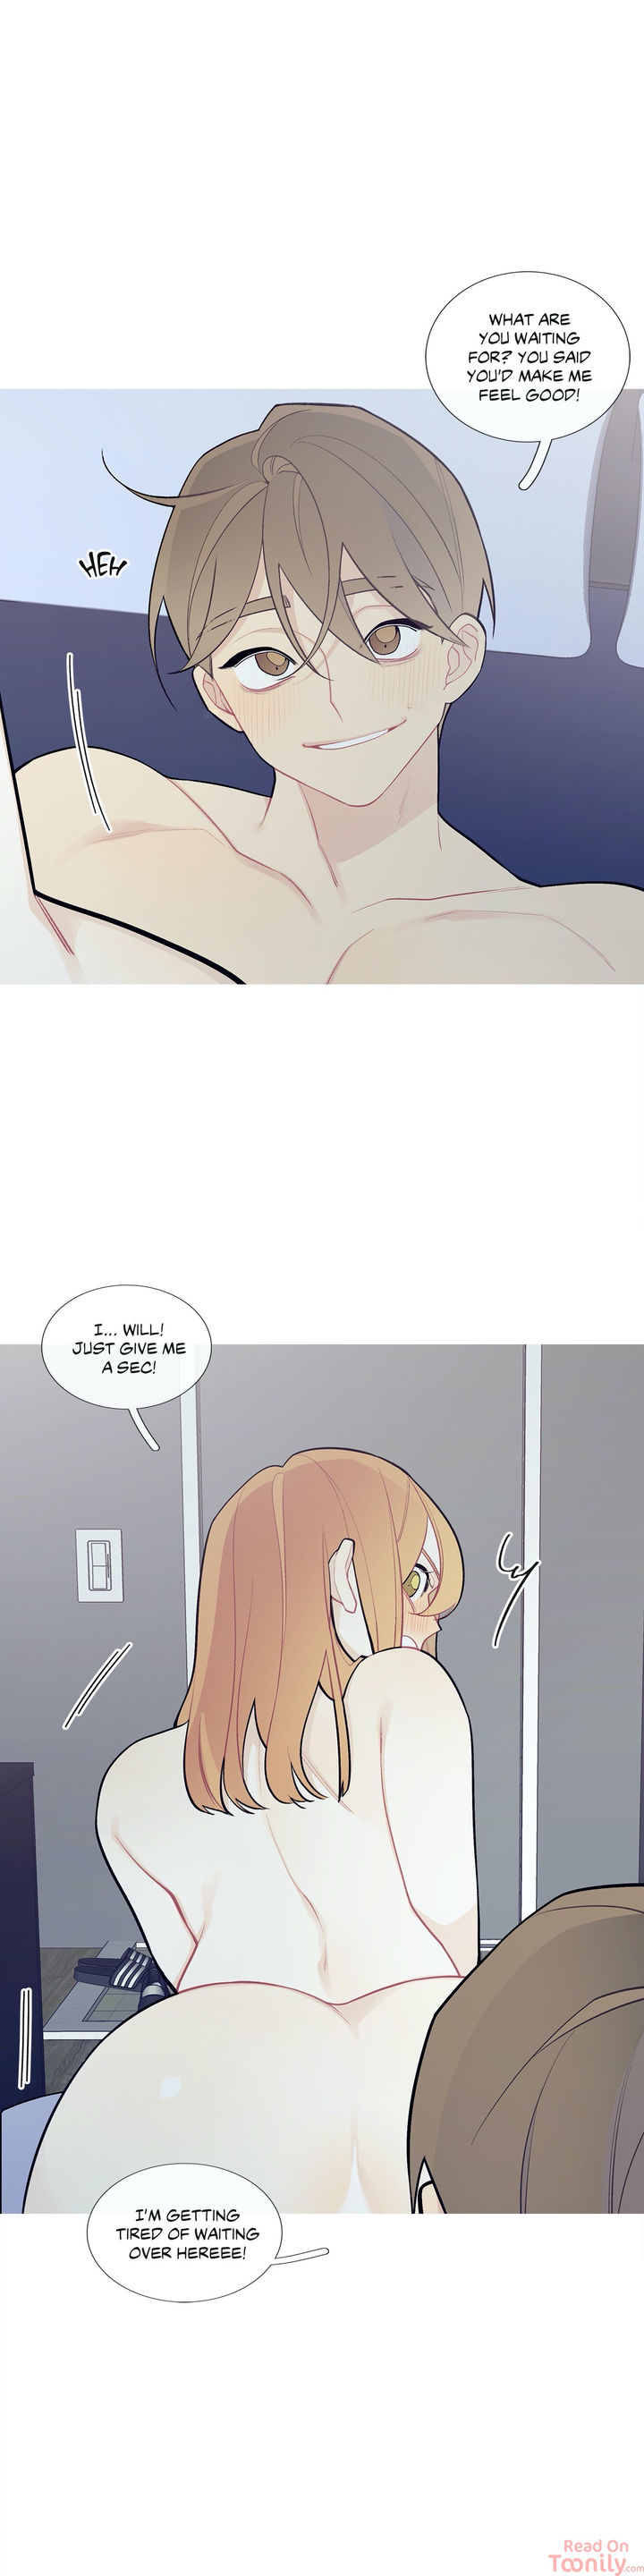 What’s Going On? - Chapter 69 Page 2